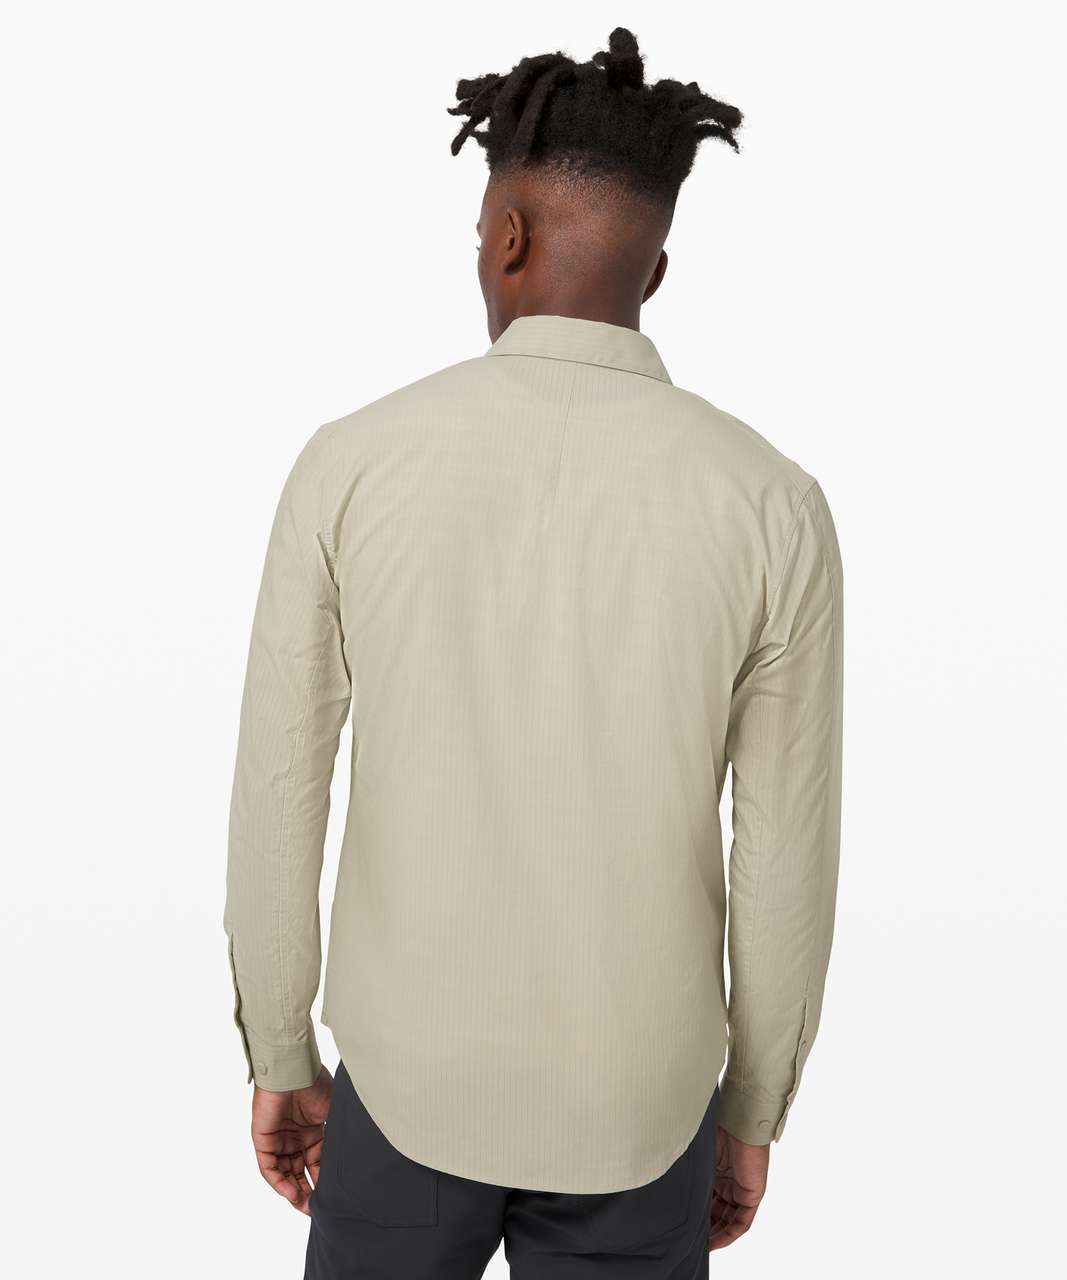 Lululemon Down to the Wire Long Sleeve Shirt - Light Sage